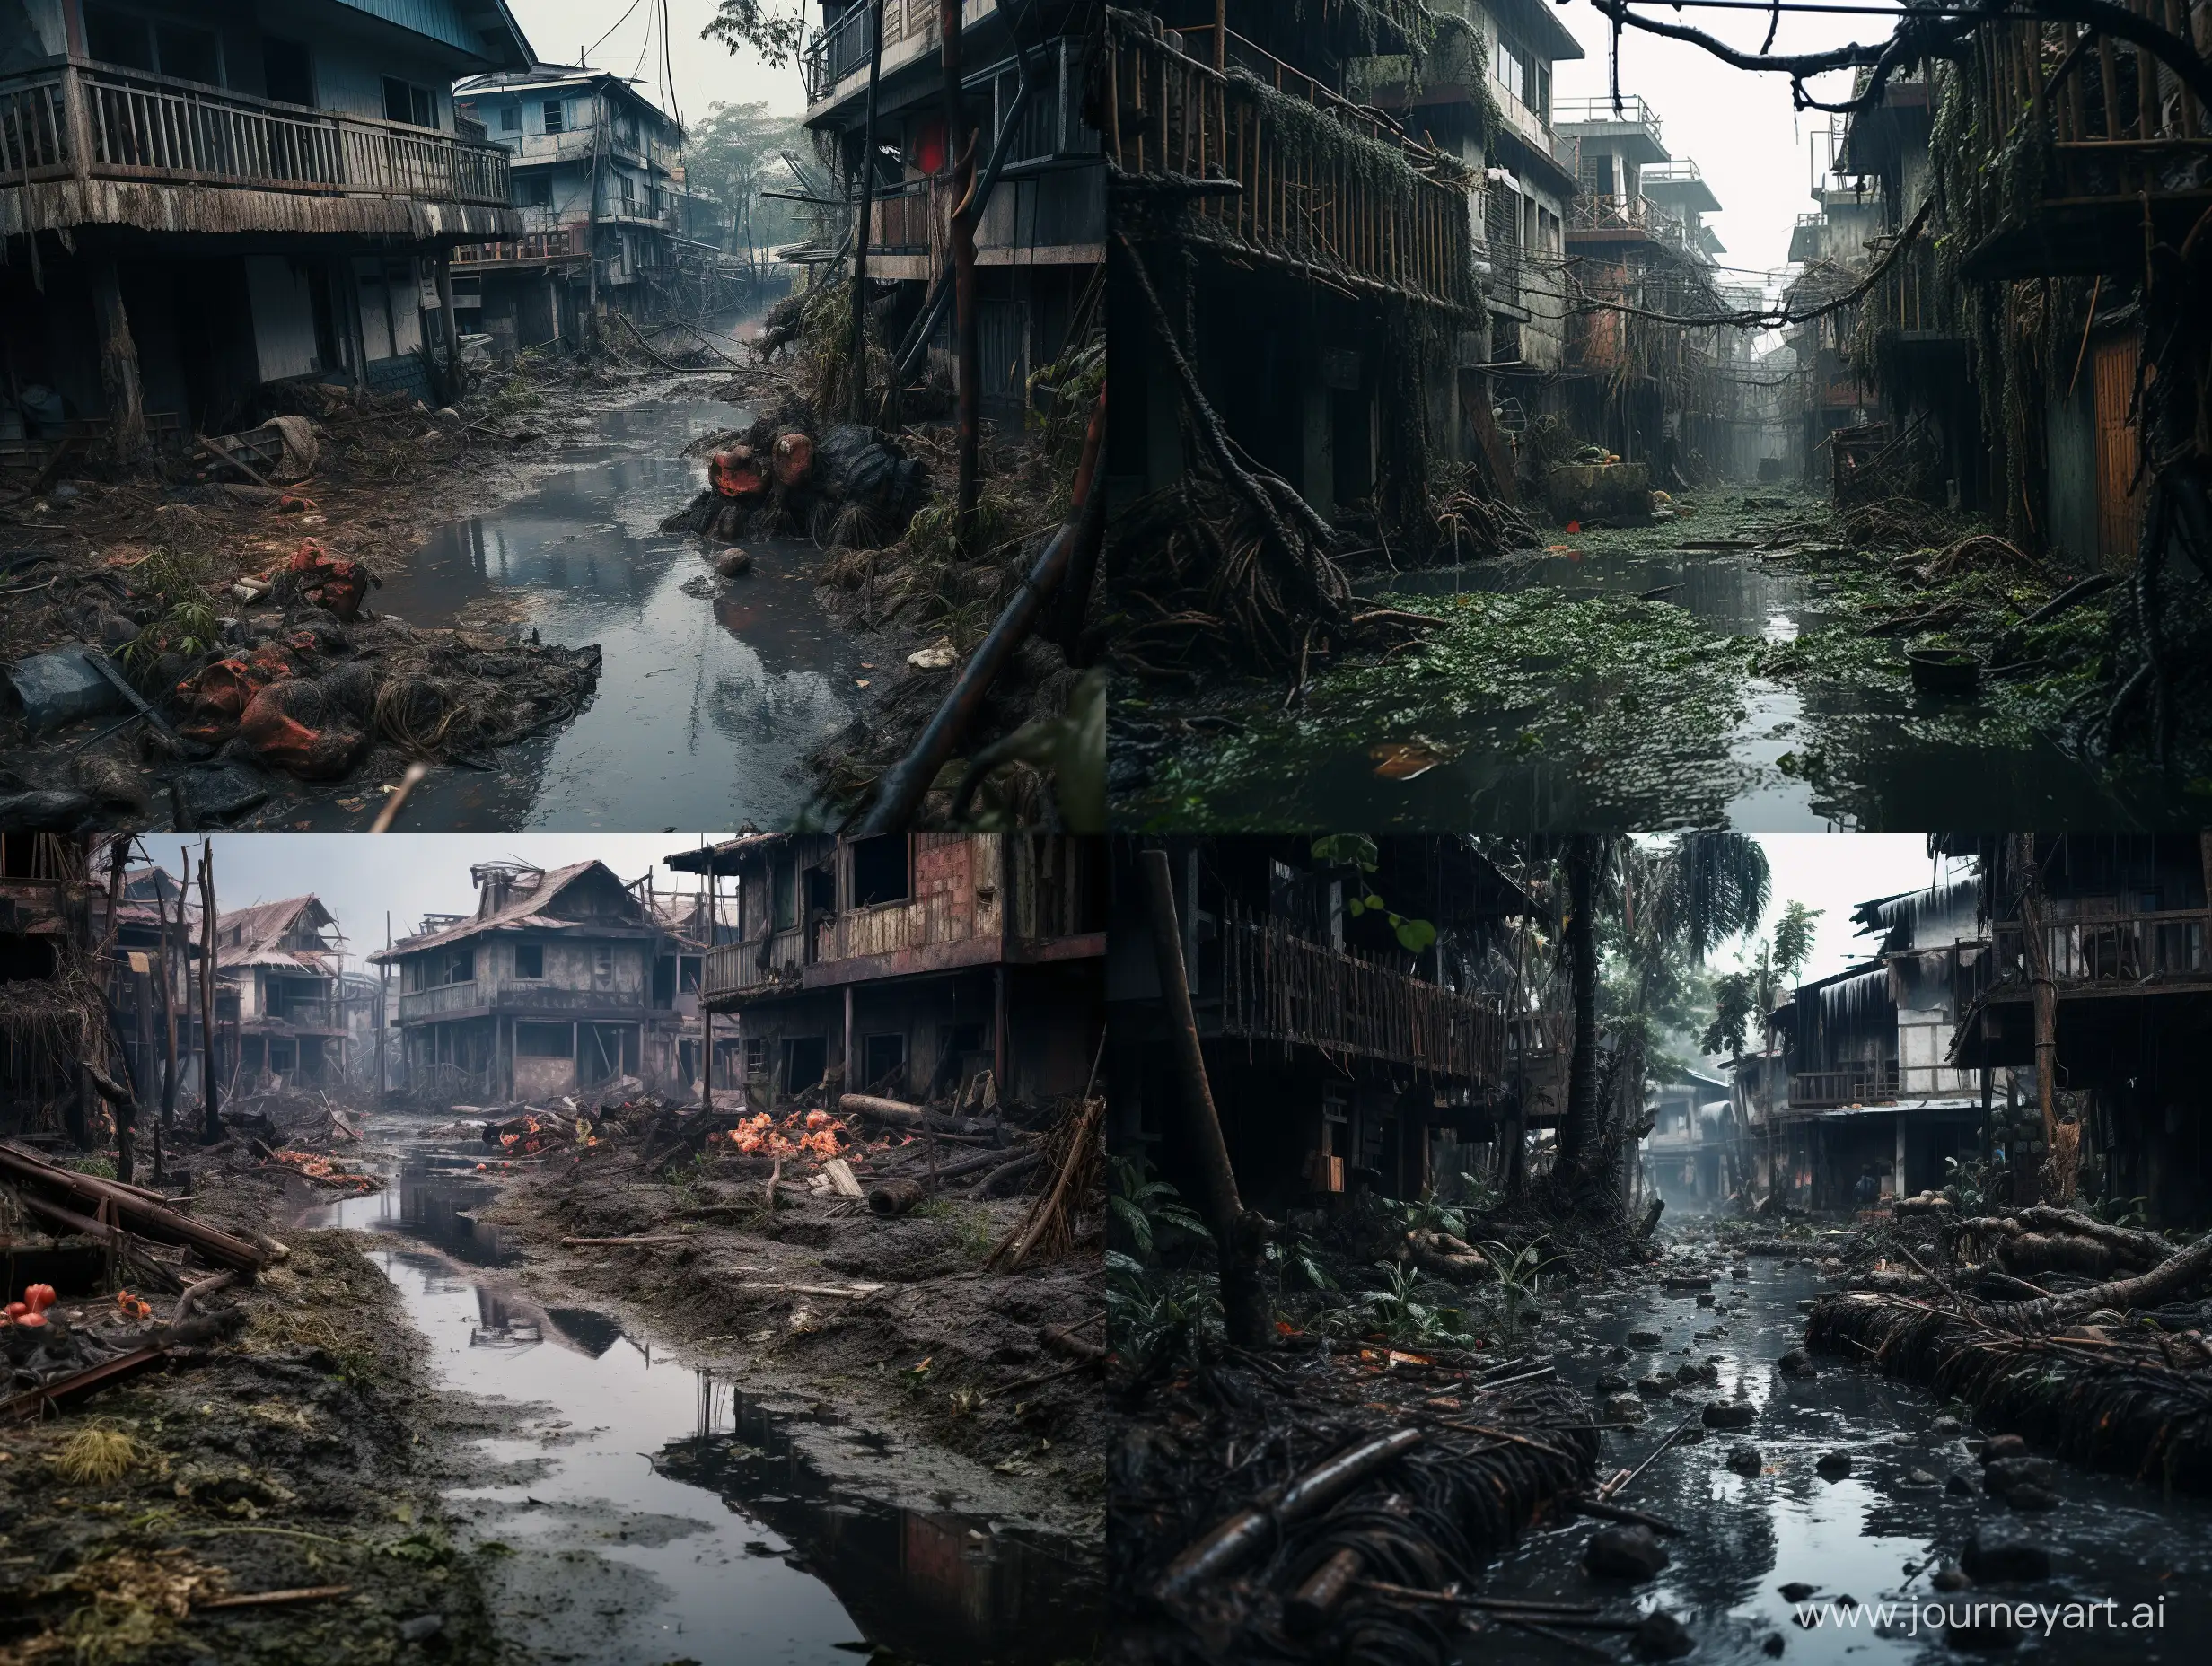 PostApocalyptic-Abandoned-Homes-in-RainDrenched-Philippines-Town